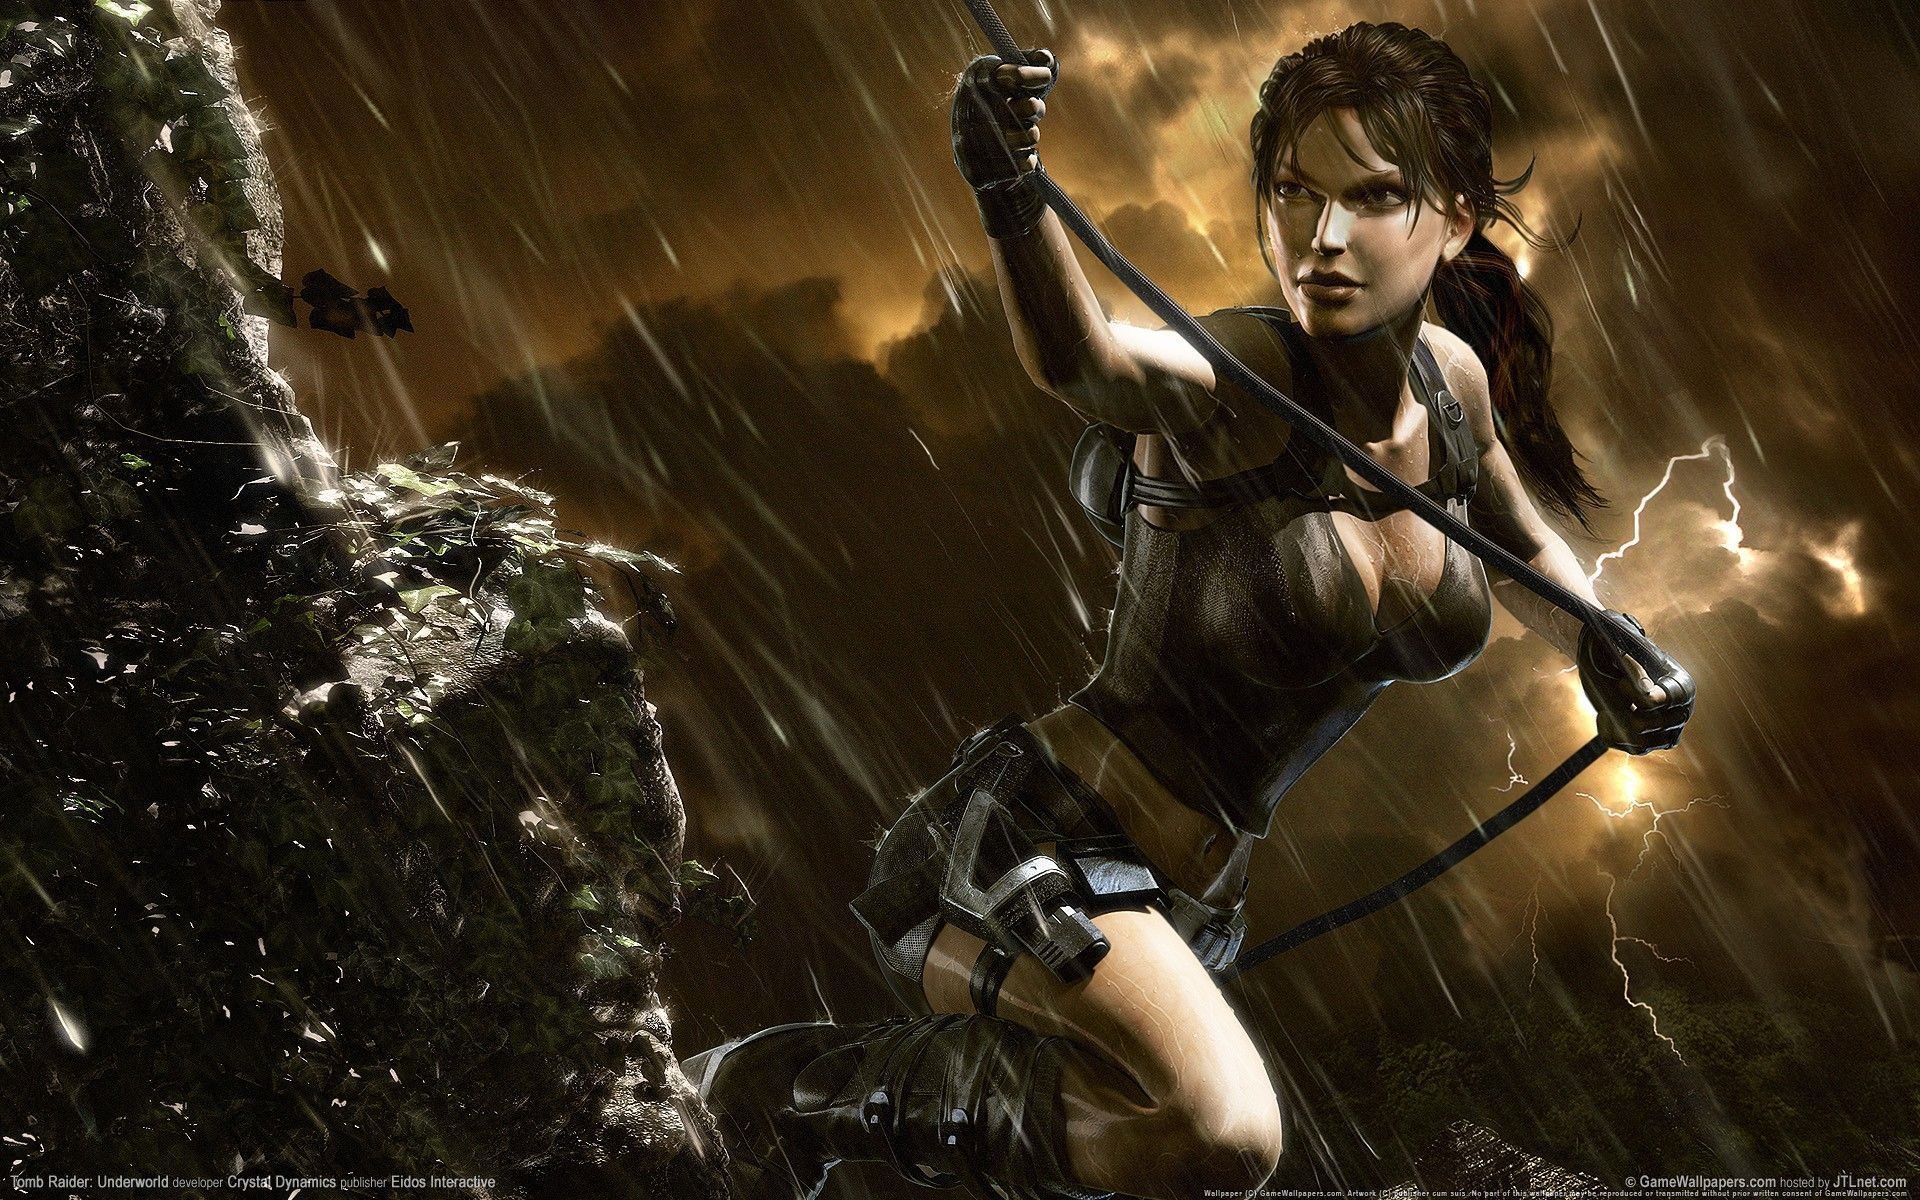 tomb raider underworld also known as tomb raider 8 is an action